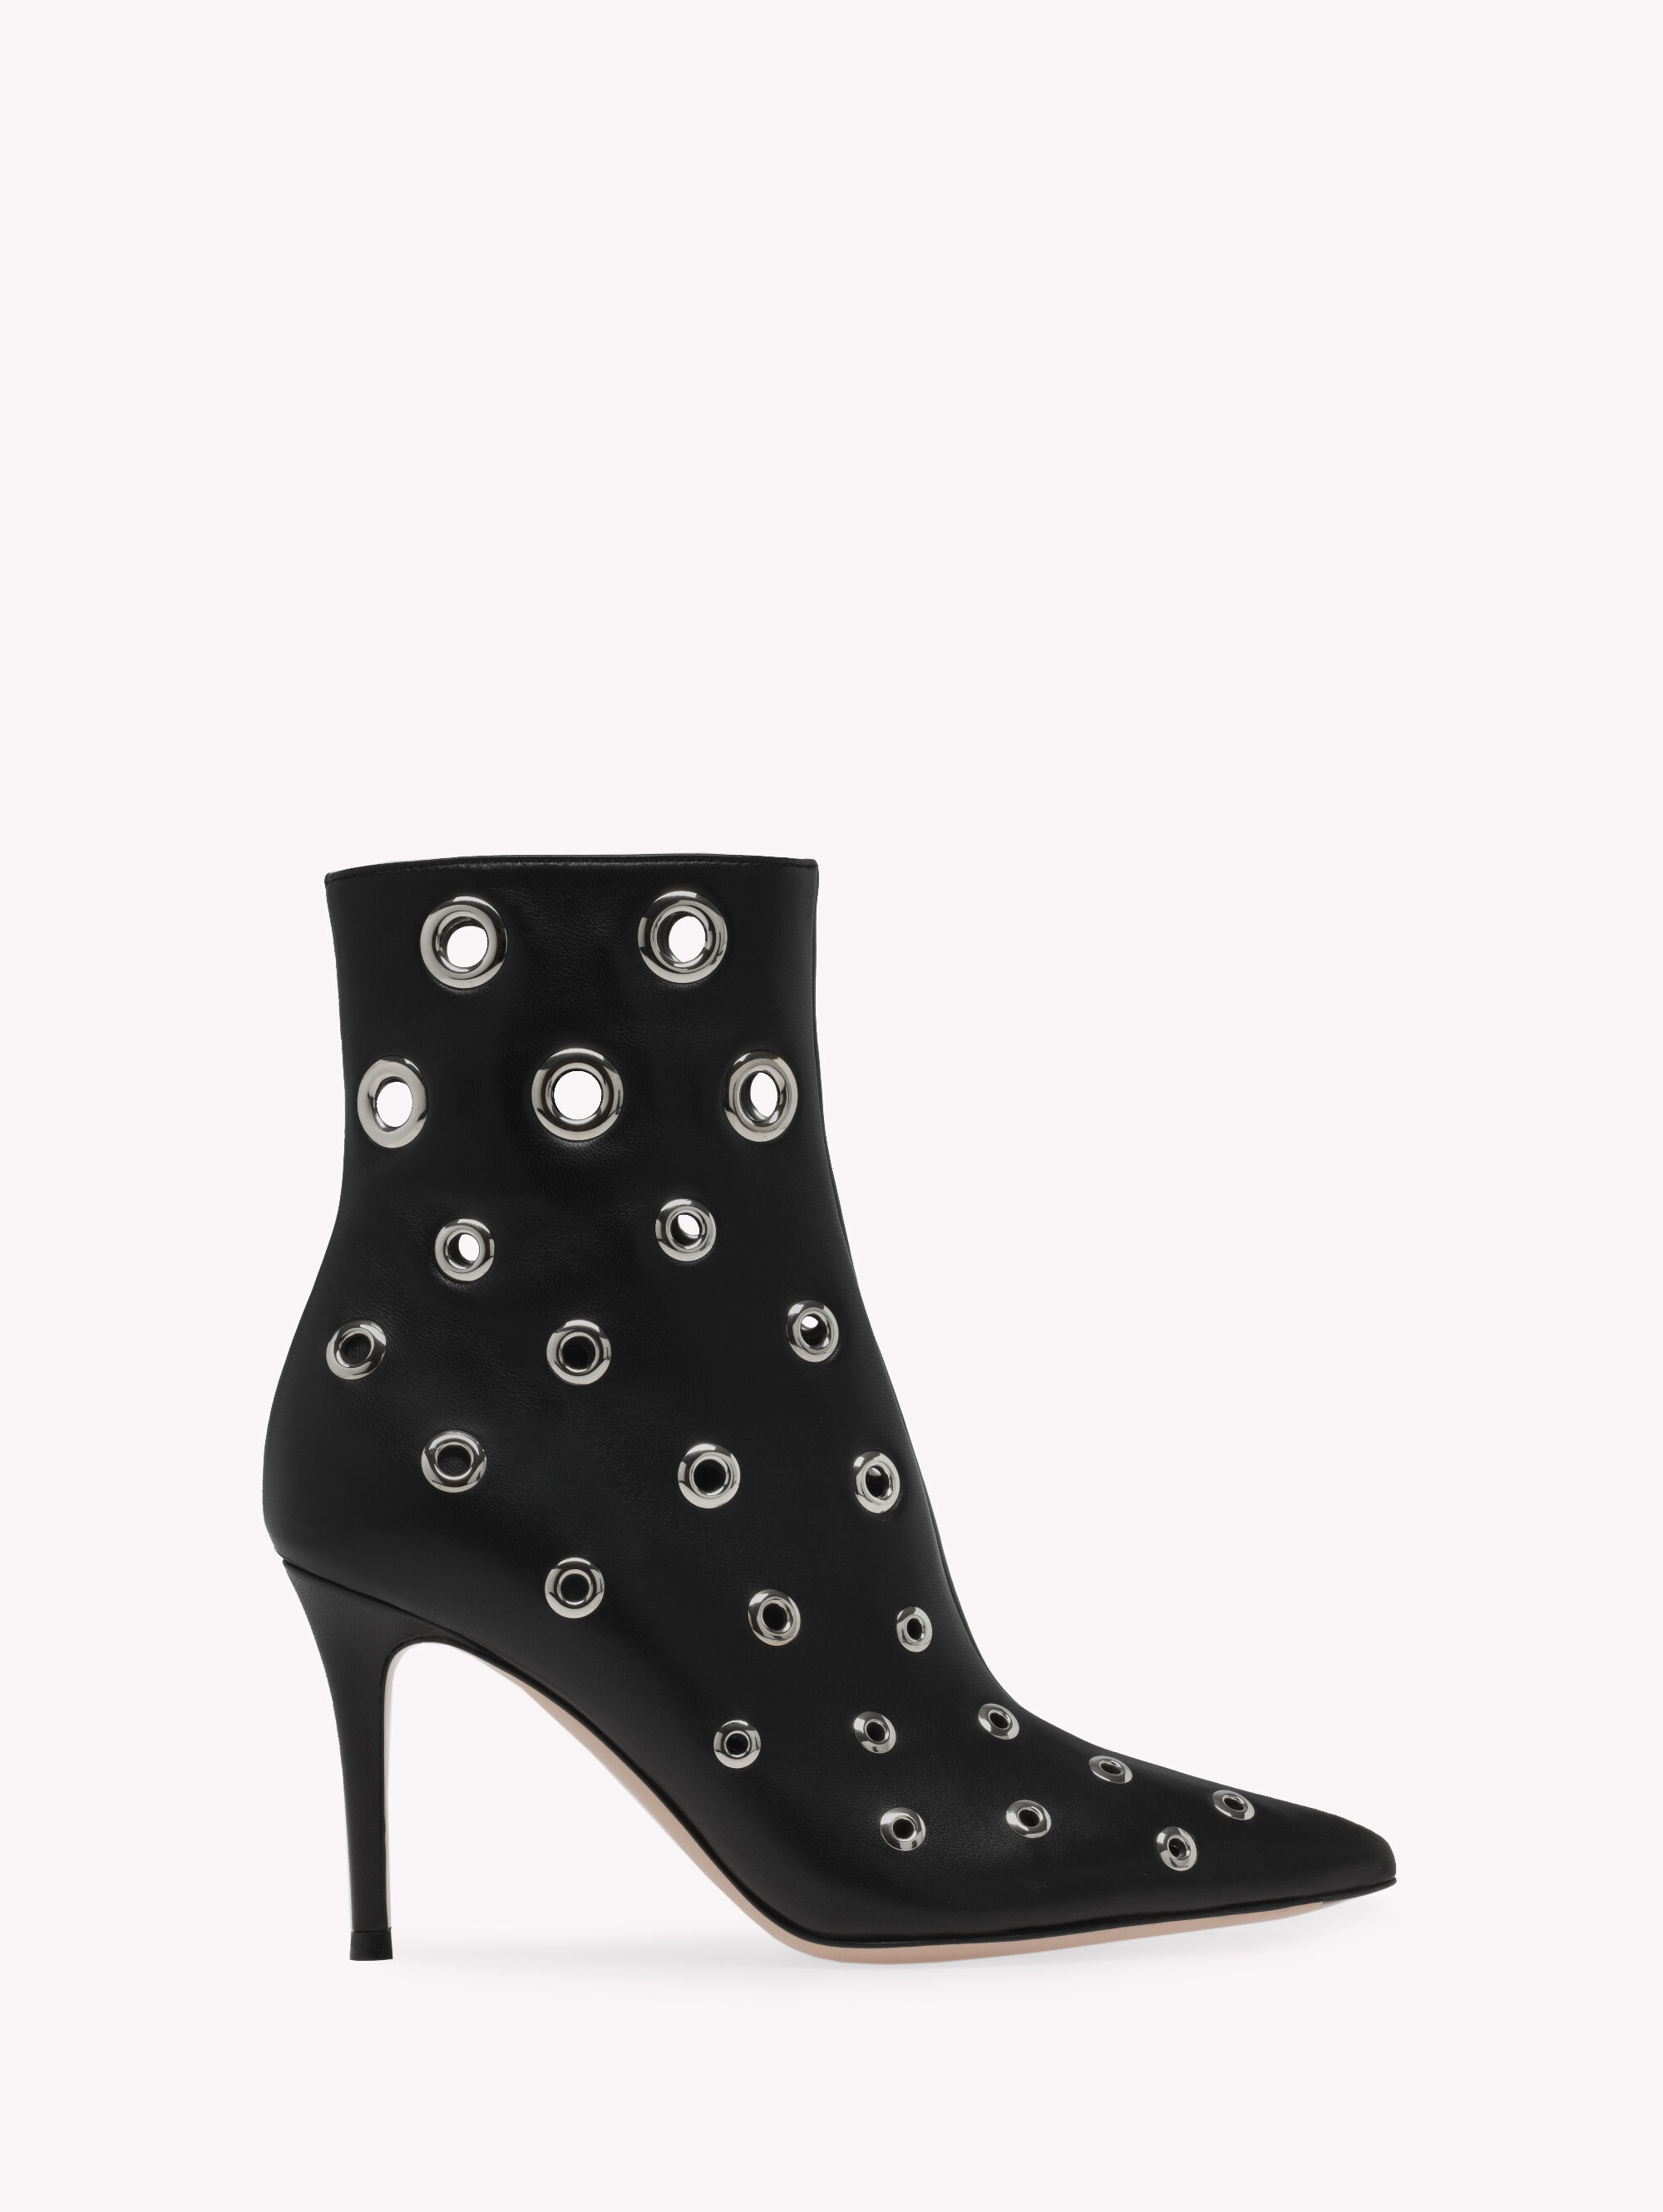 Luxury Ankle Boots for Women | Gianvito Rossi